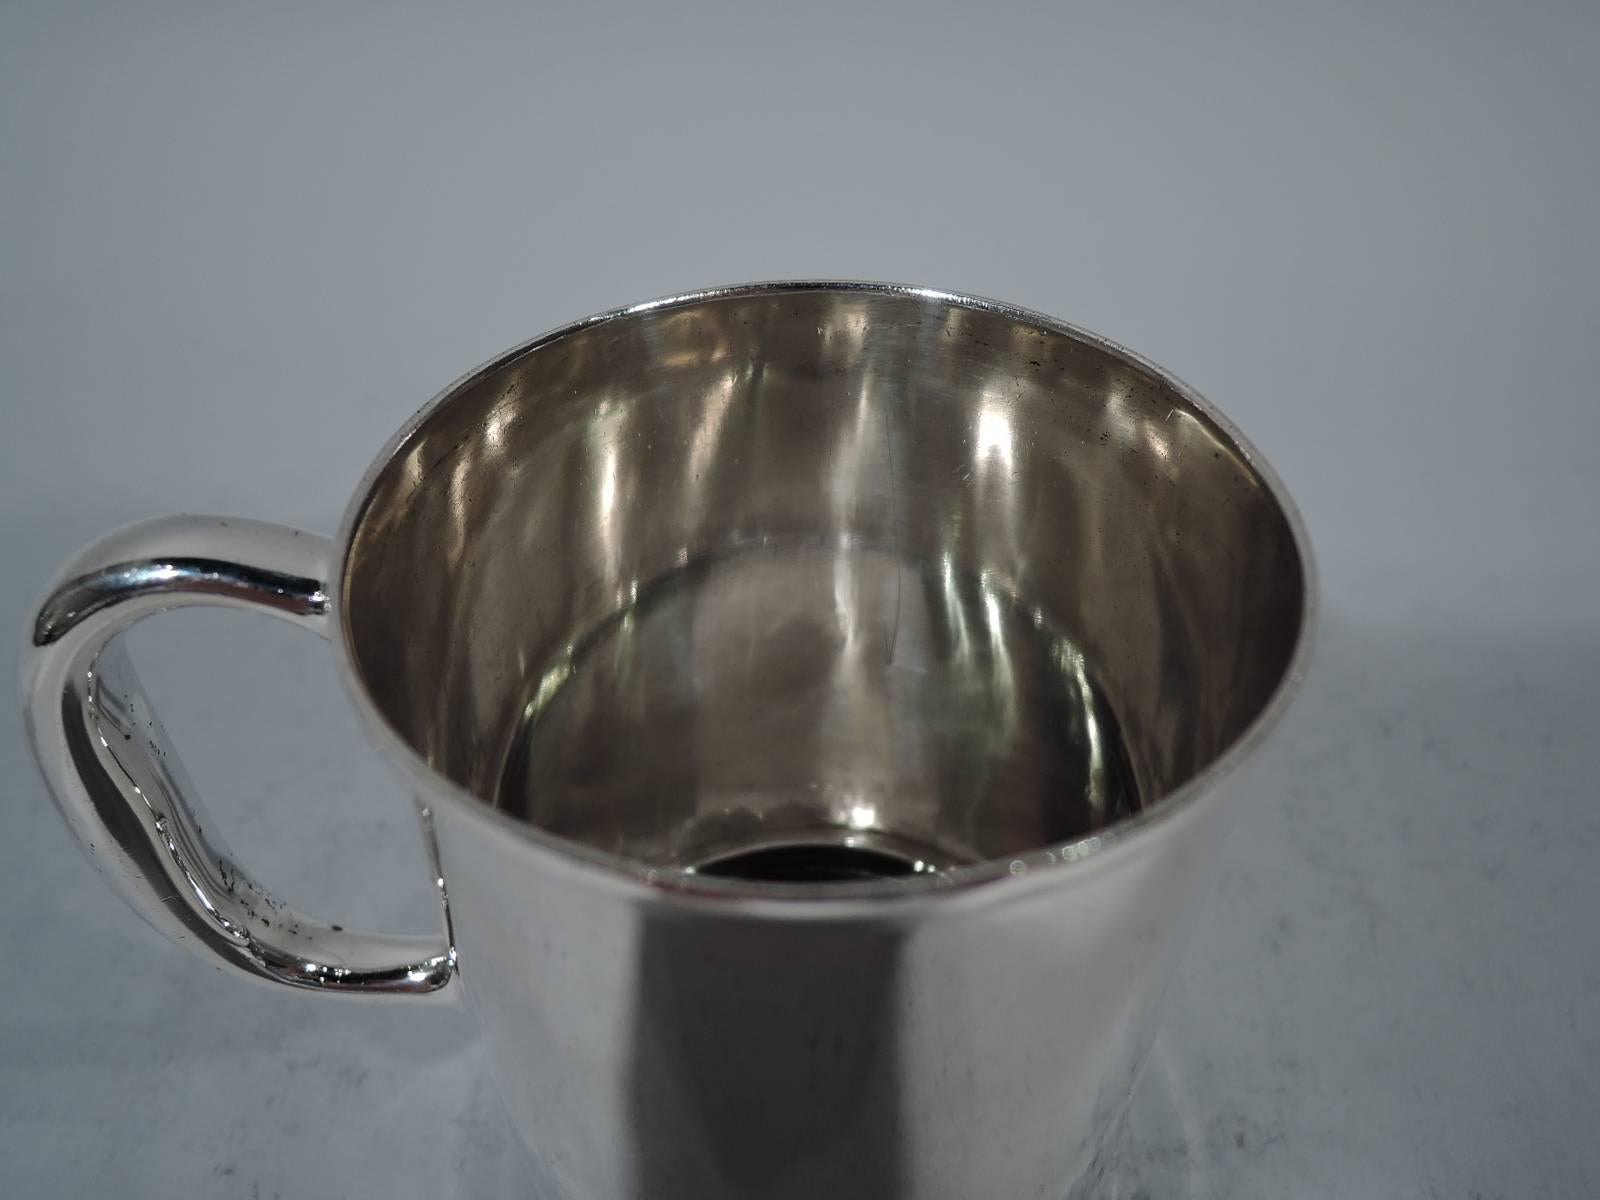 Edwardian sterling silver baby cup. Made by Tiffany & Co. in New York, circa 1909. Straight sides, raised and inset foot, and C-scroll handle. Lots and lots of room for engraving. Hallmark includes pattern no. 17285 (first produced in 1909) and